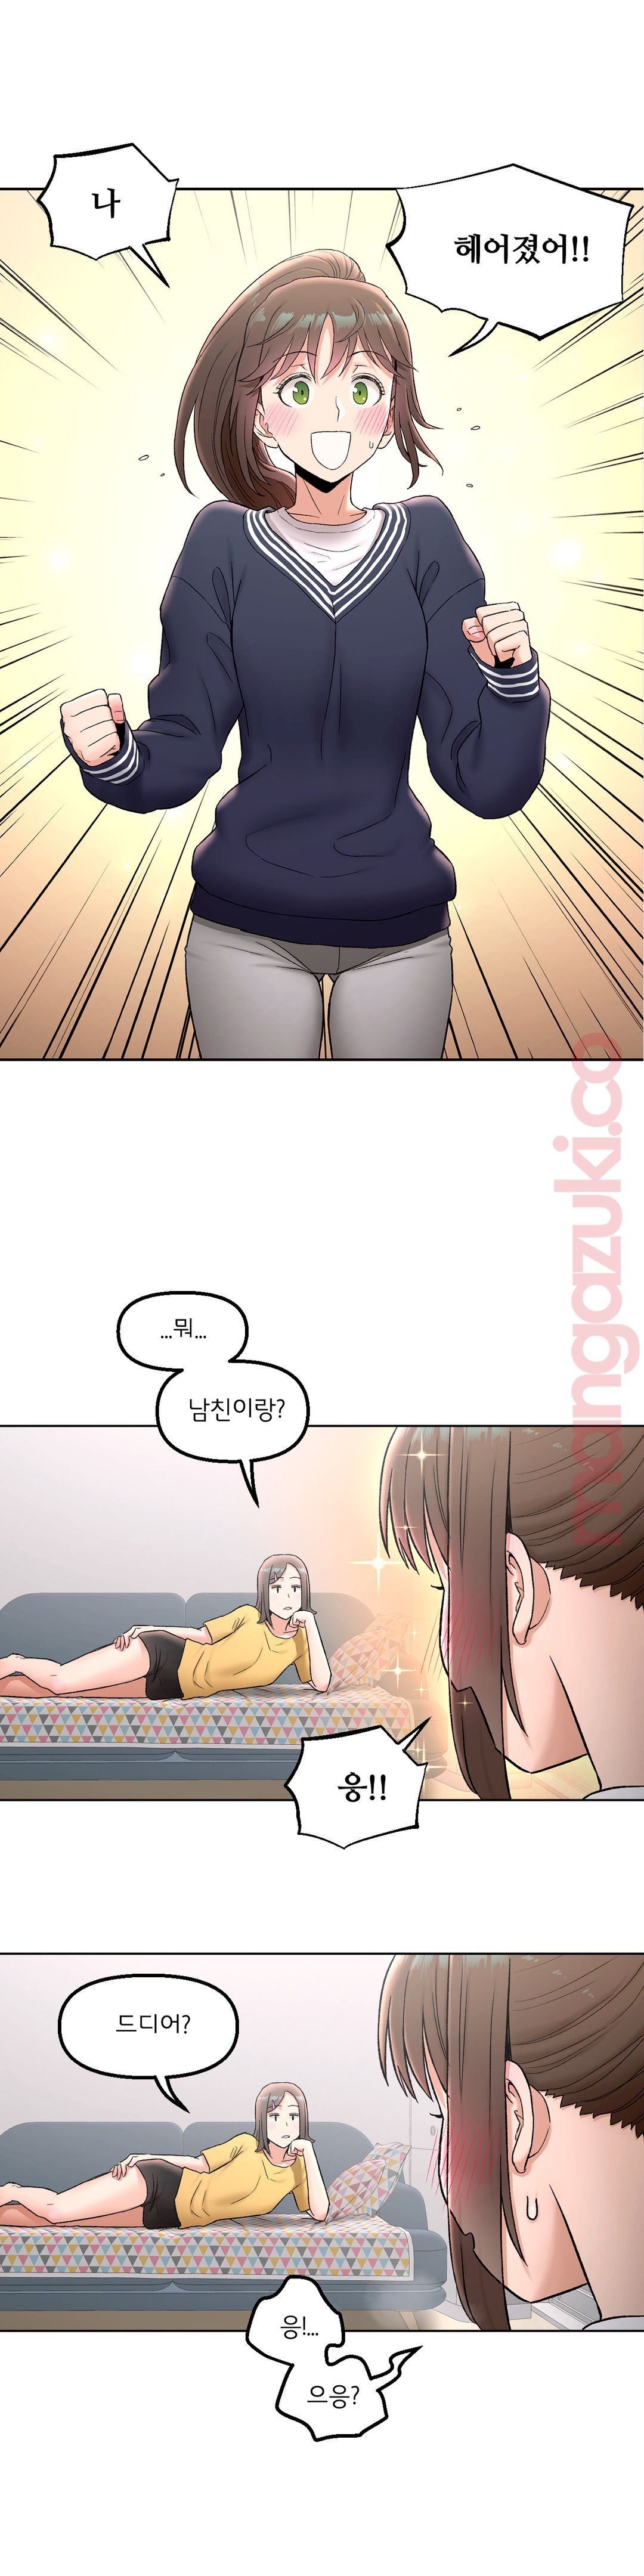 Sexercise Raw - Chapter 53 Page 2